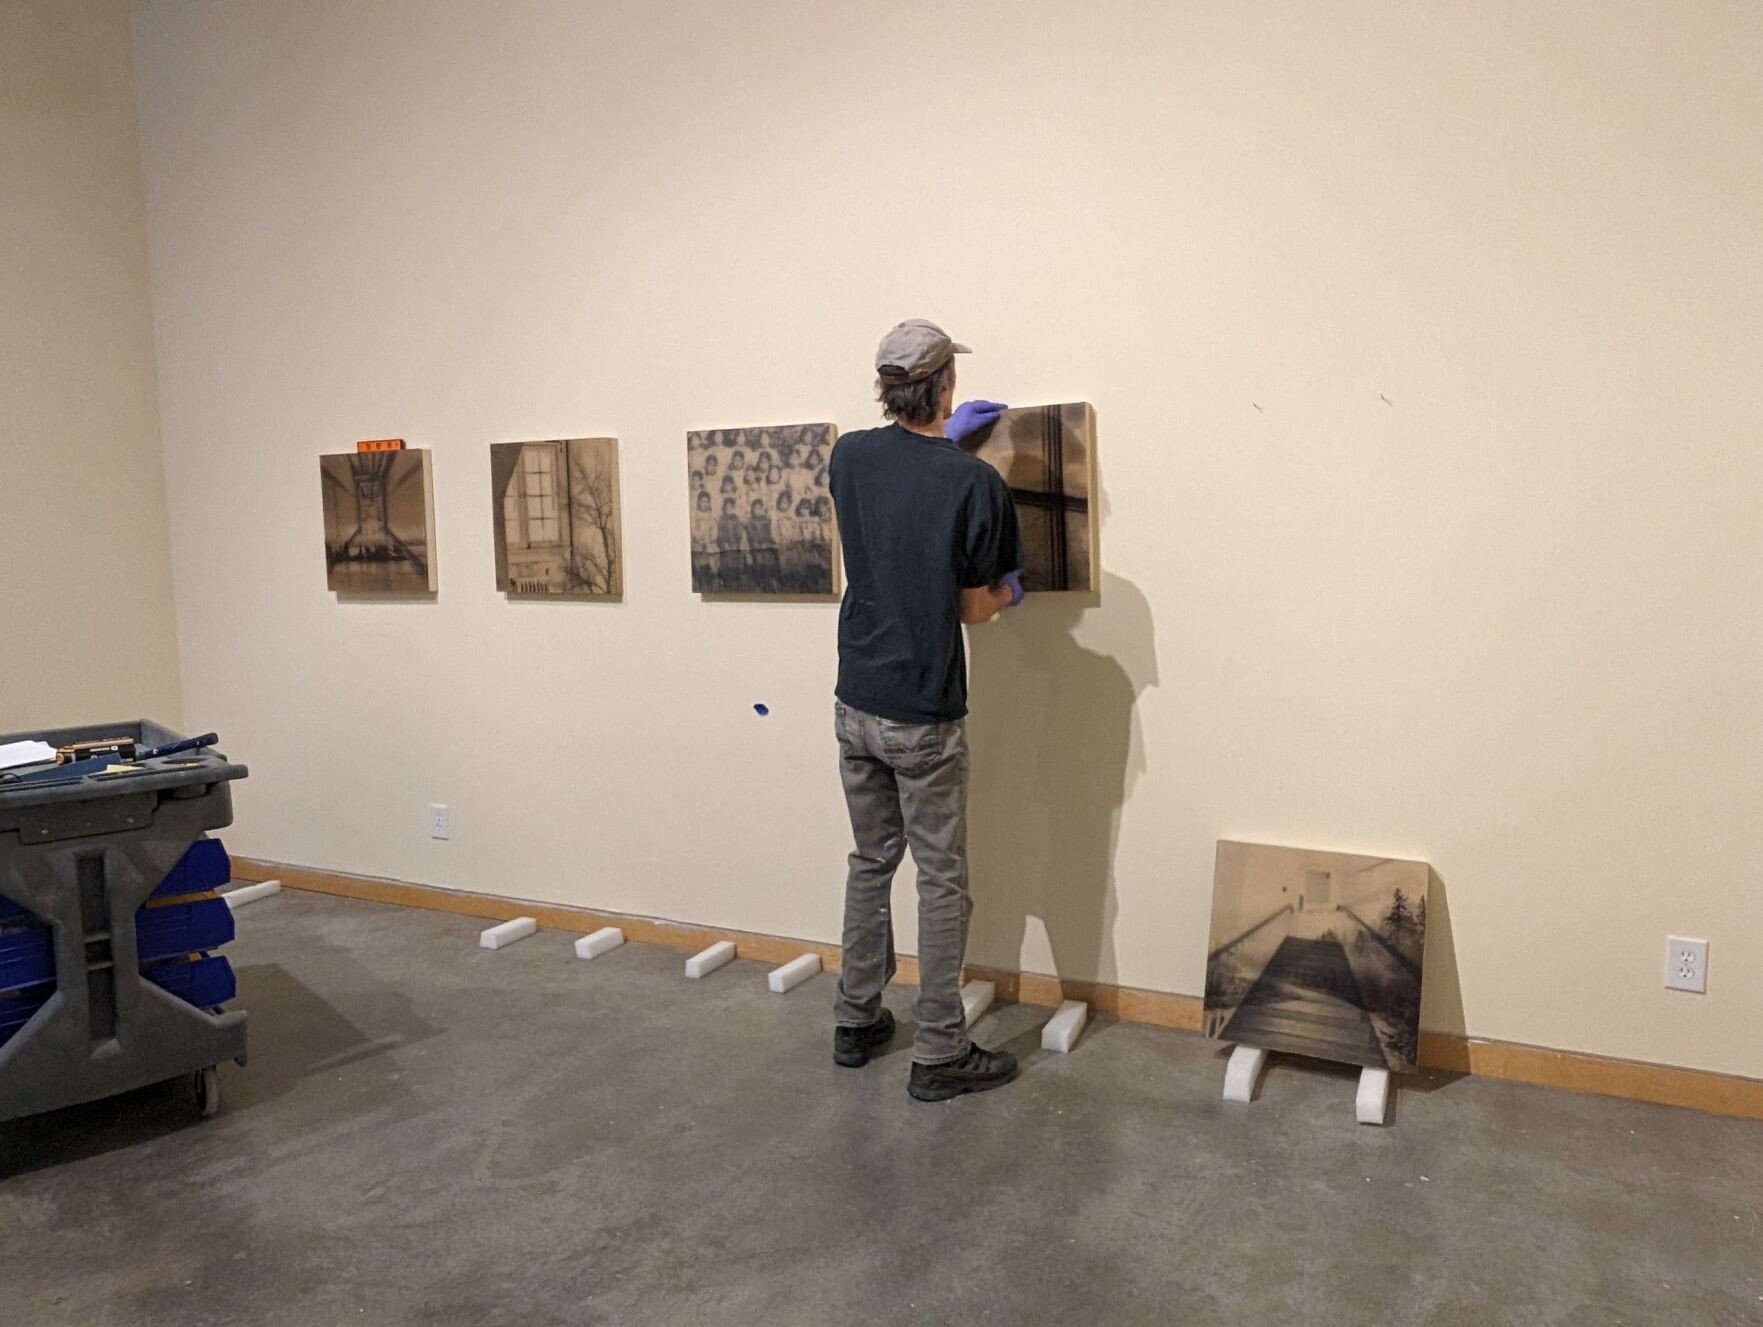 It&rsquo;s the last day of install for The Cube&rsquo;s spring exhibition. Pieces brings together the artwork of settler artist Victoria Kjargaard, in dialogue with Nłeʔkepmx curator Elsie Joe. Pictured here is Head Preparator Matthew mounting a seri